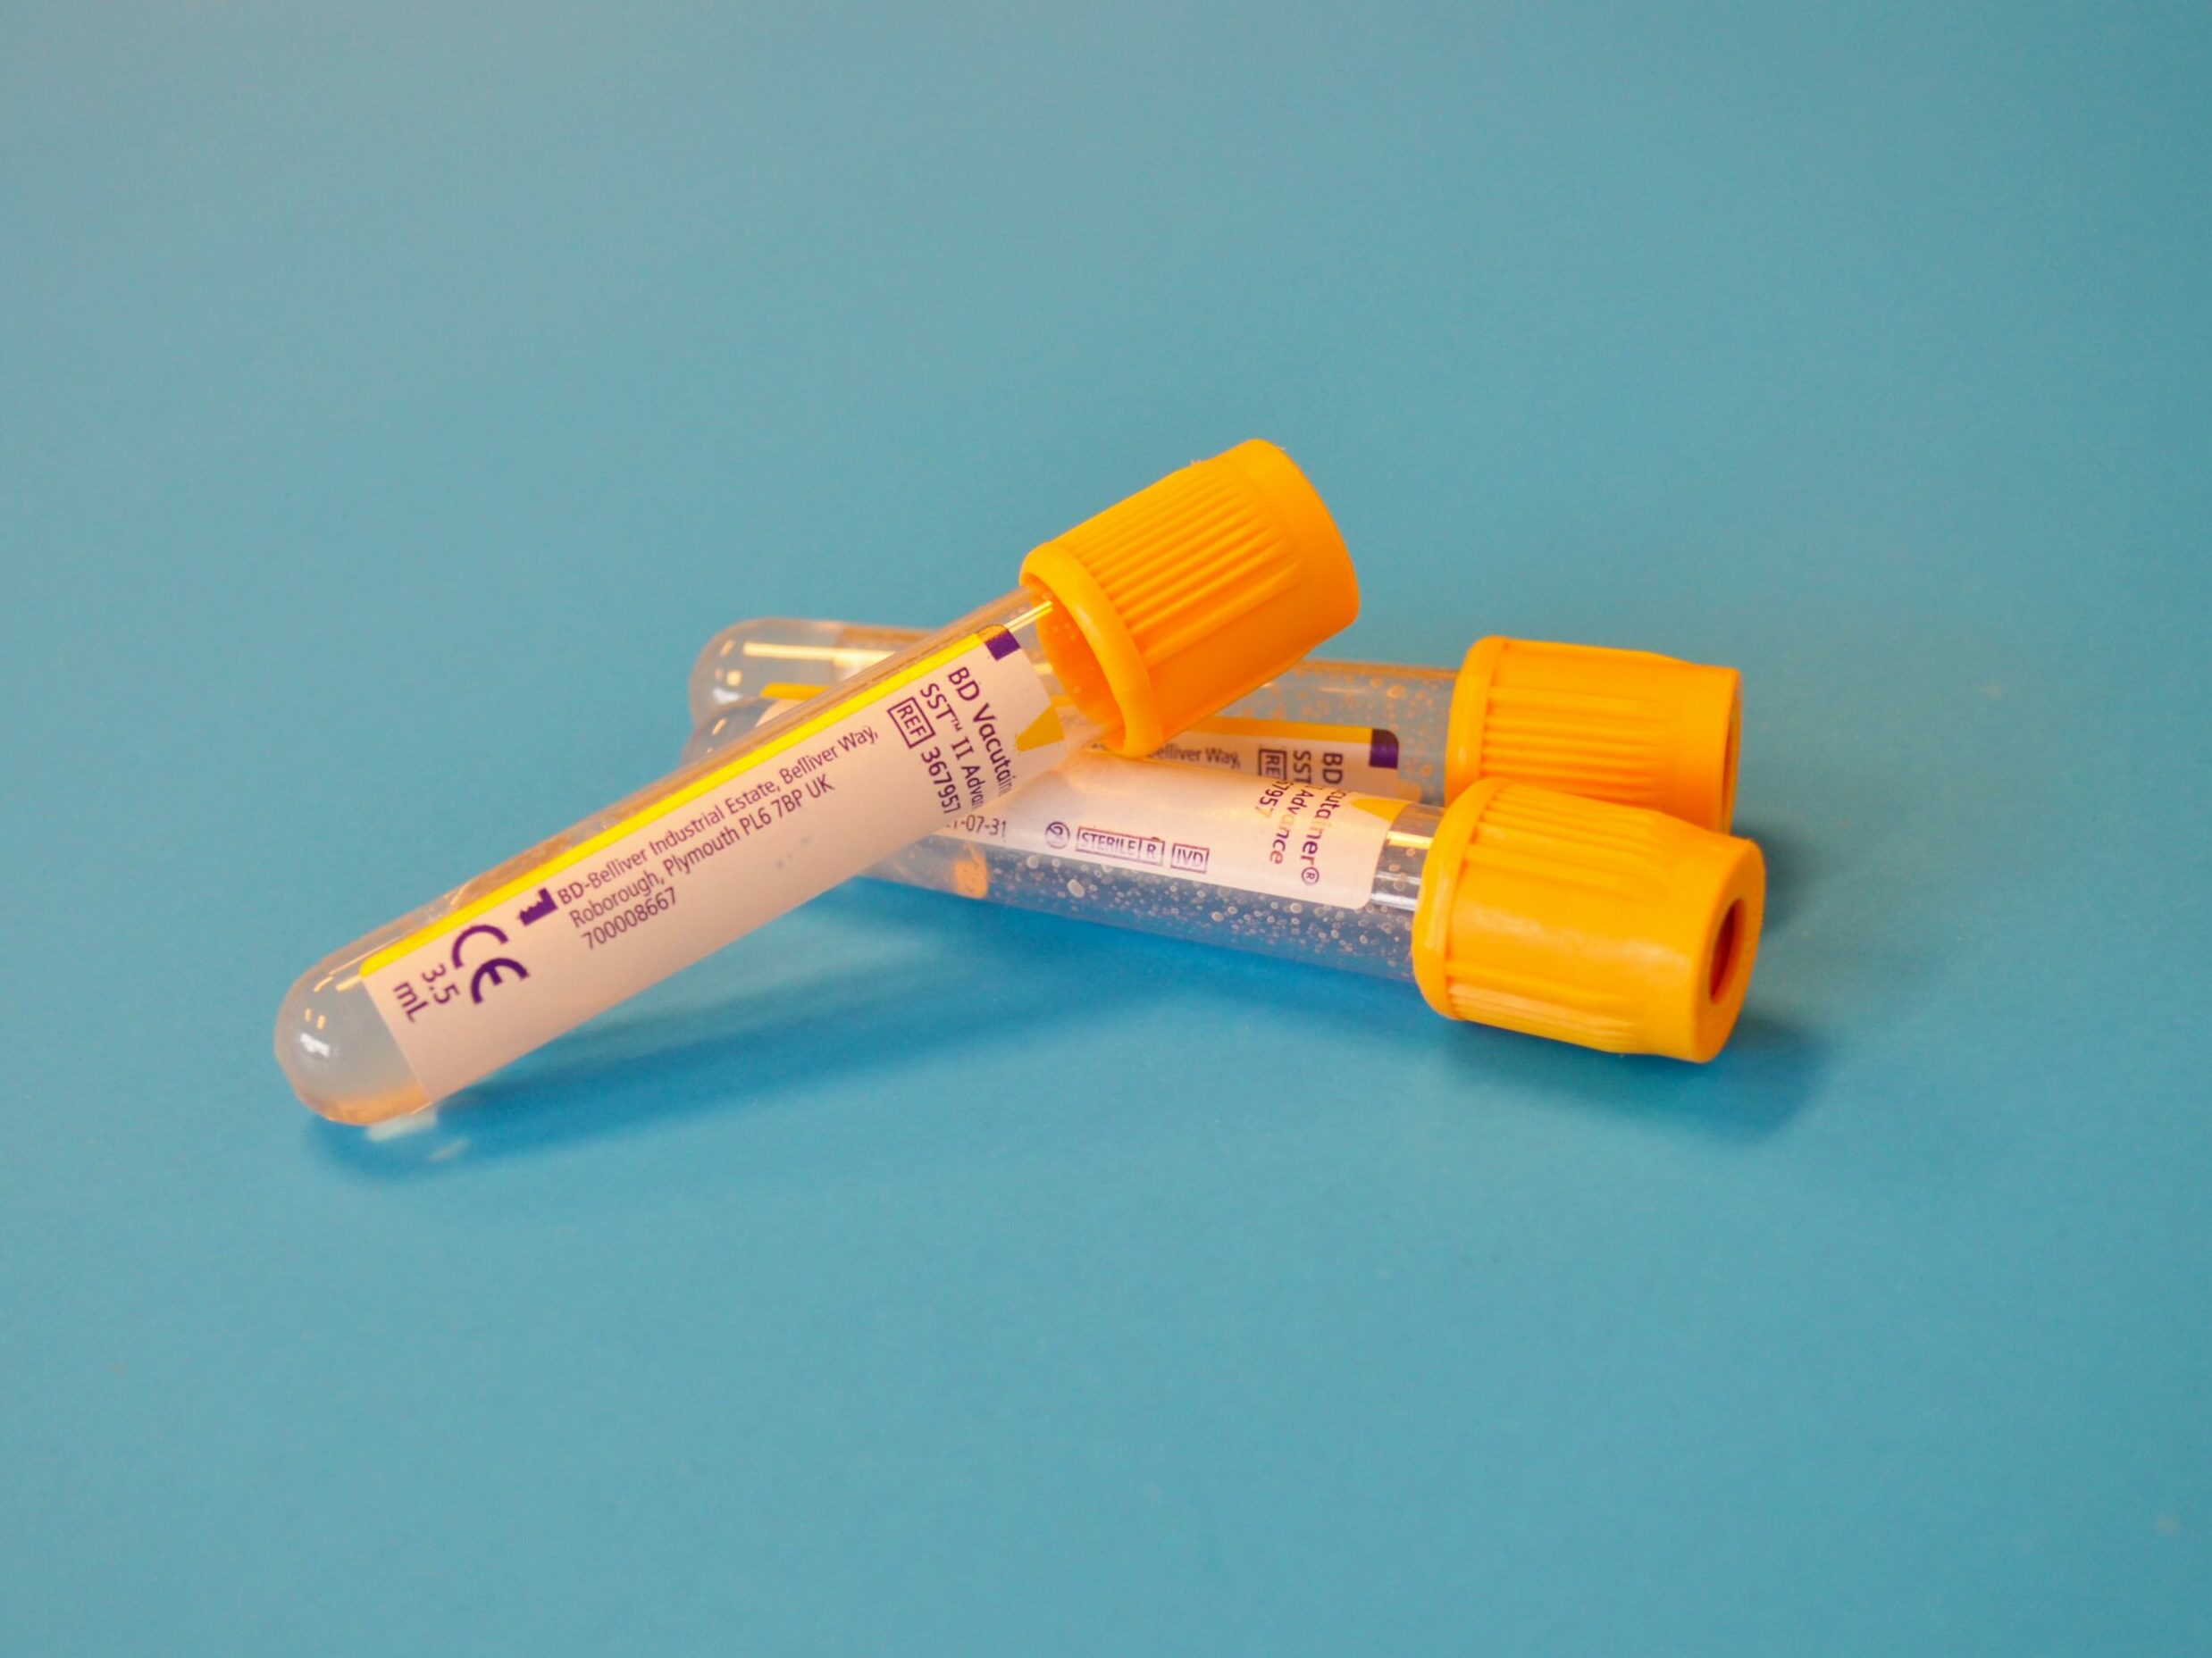 Tubes for the transportation of blood. BD Vacutainer.